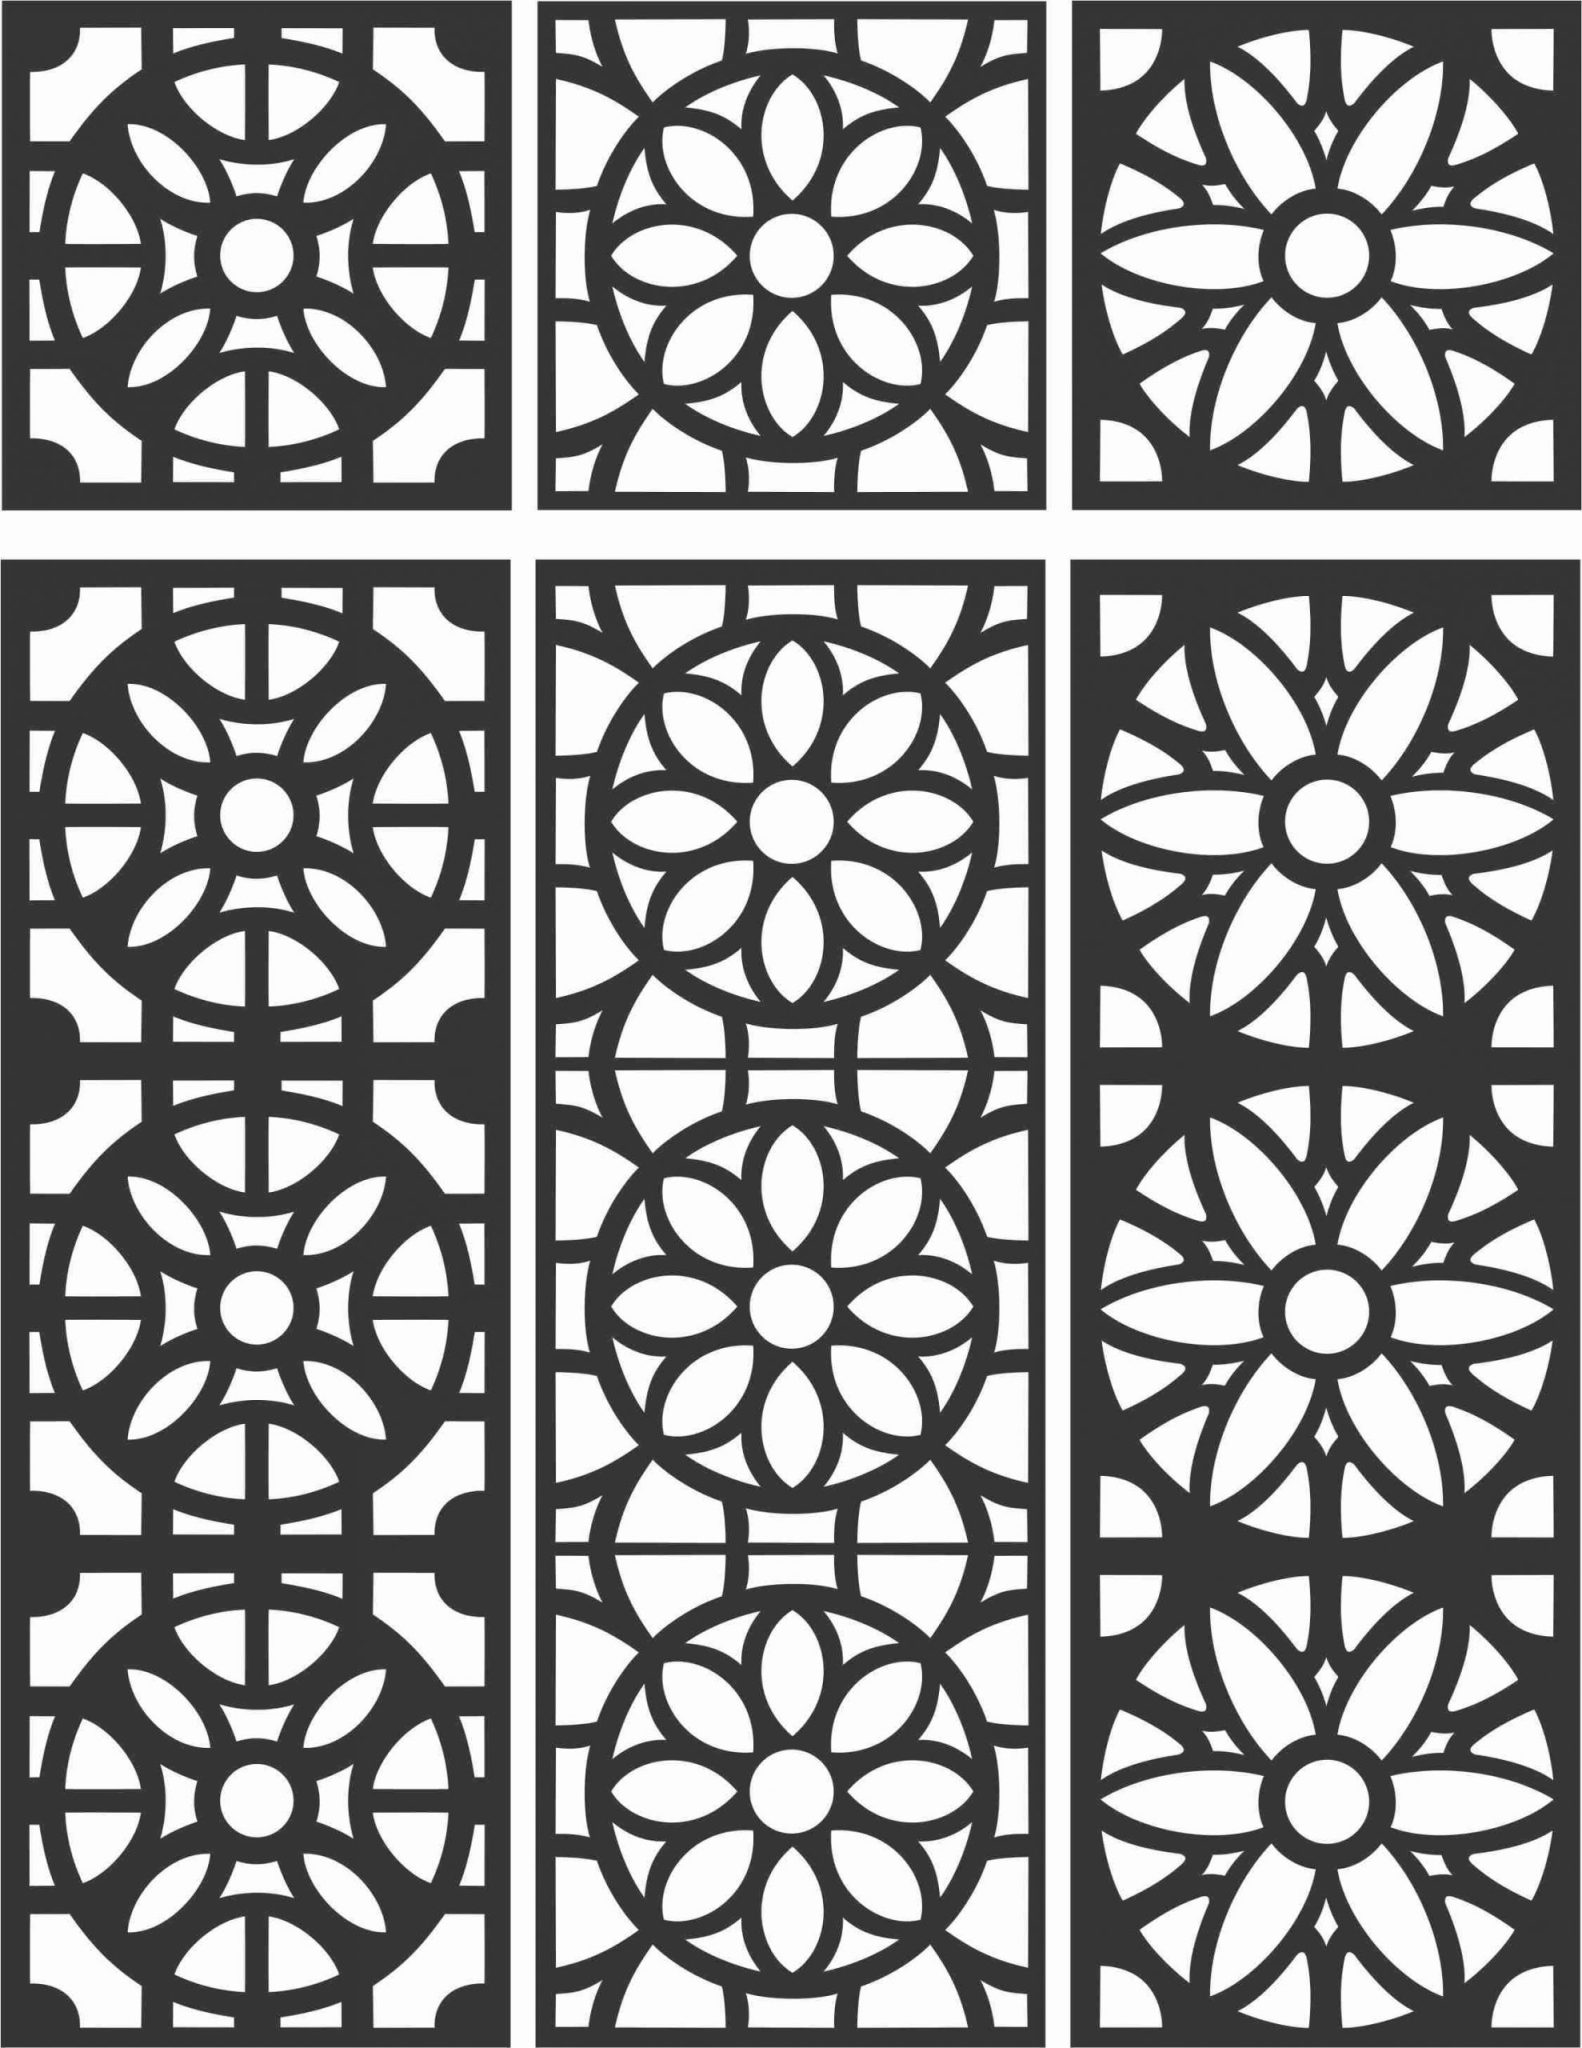 Floral Screen Patterns Design 110 Free DXF File